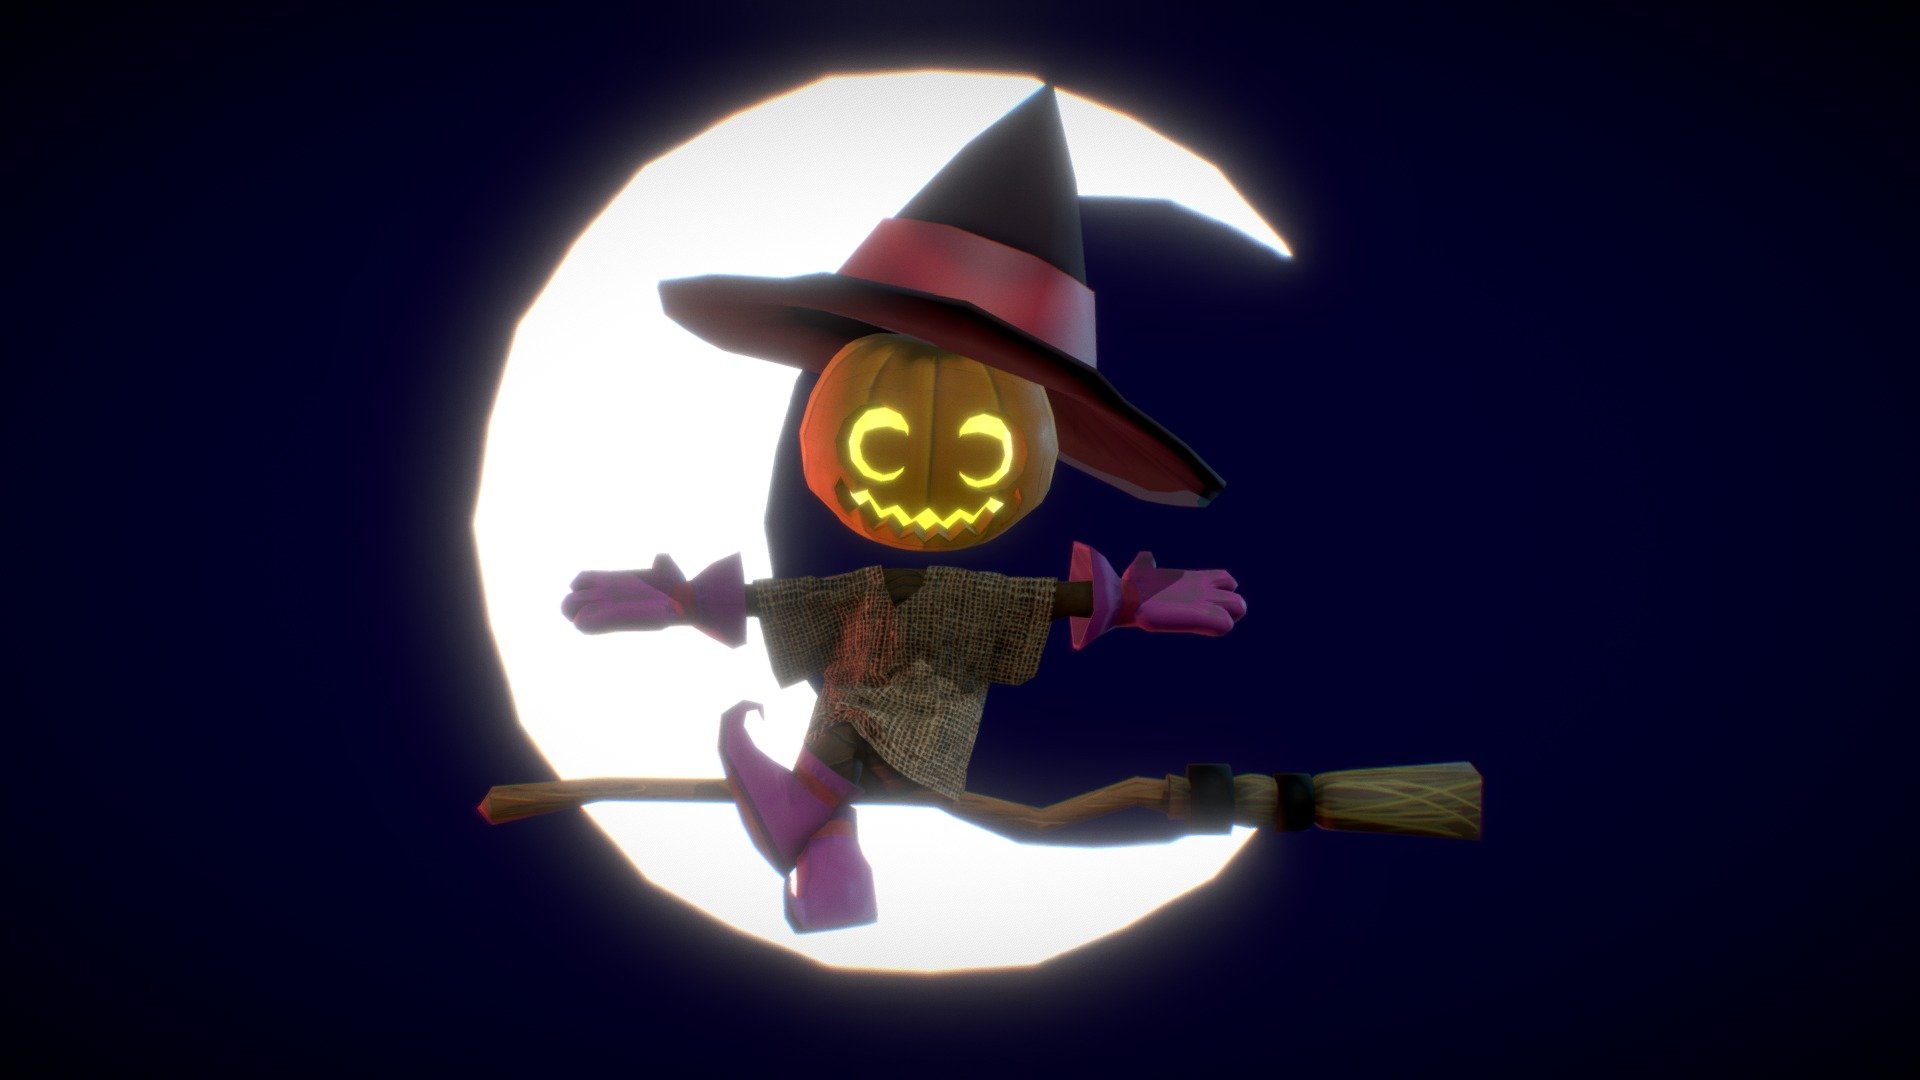 I challenged myself to make a full animated model in the week before Halloween using nothing but Blender.
So I came up with this pumpkin witch concept and spent all week working on it, midst other college projects. 

Hope you all like it! And please ask me before using it in other projects 3d model